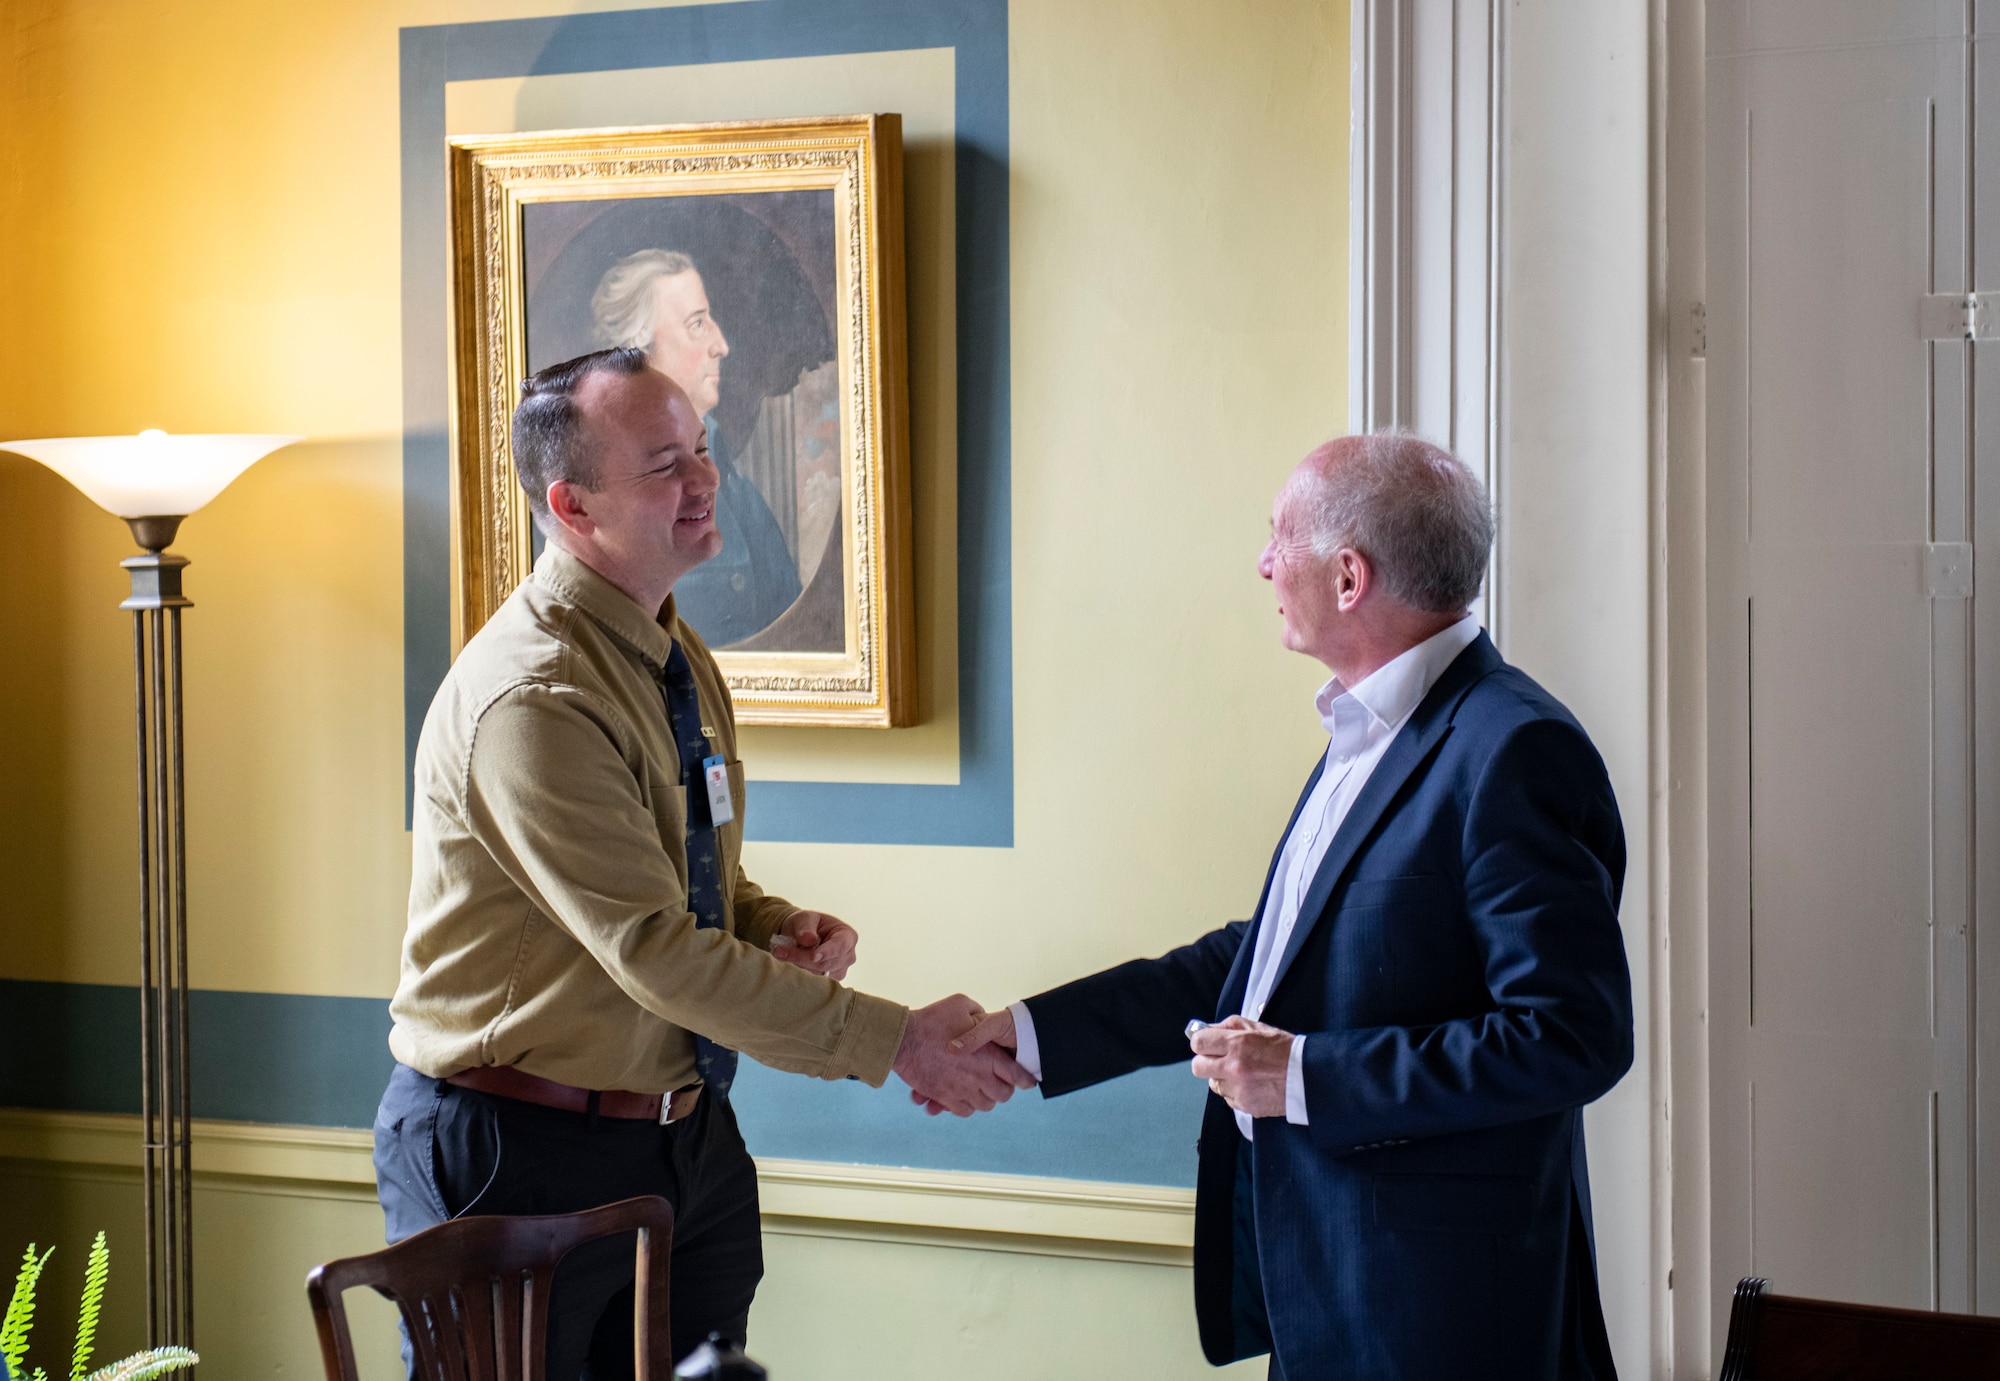 Lt. Col. Jason Barker, 48th Fighter Wing chaplain, left, presents a military challenge coin to Alan Bookbinder, Downing College master, as a thank you for hosting members of the Leadership Connect Program, at Downing College